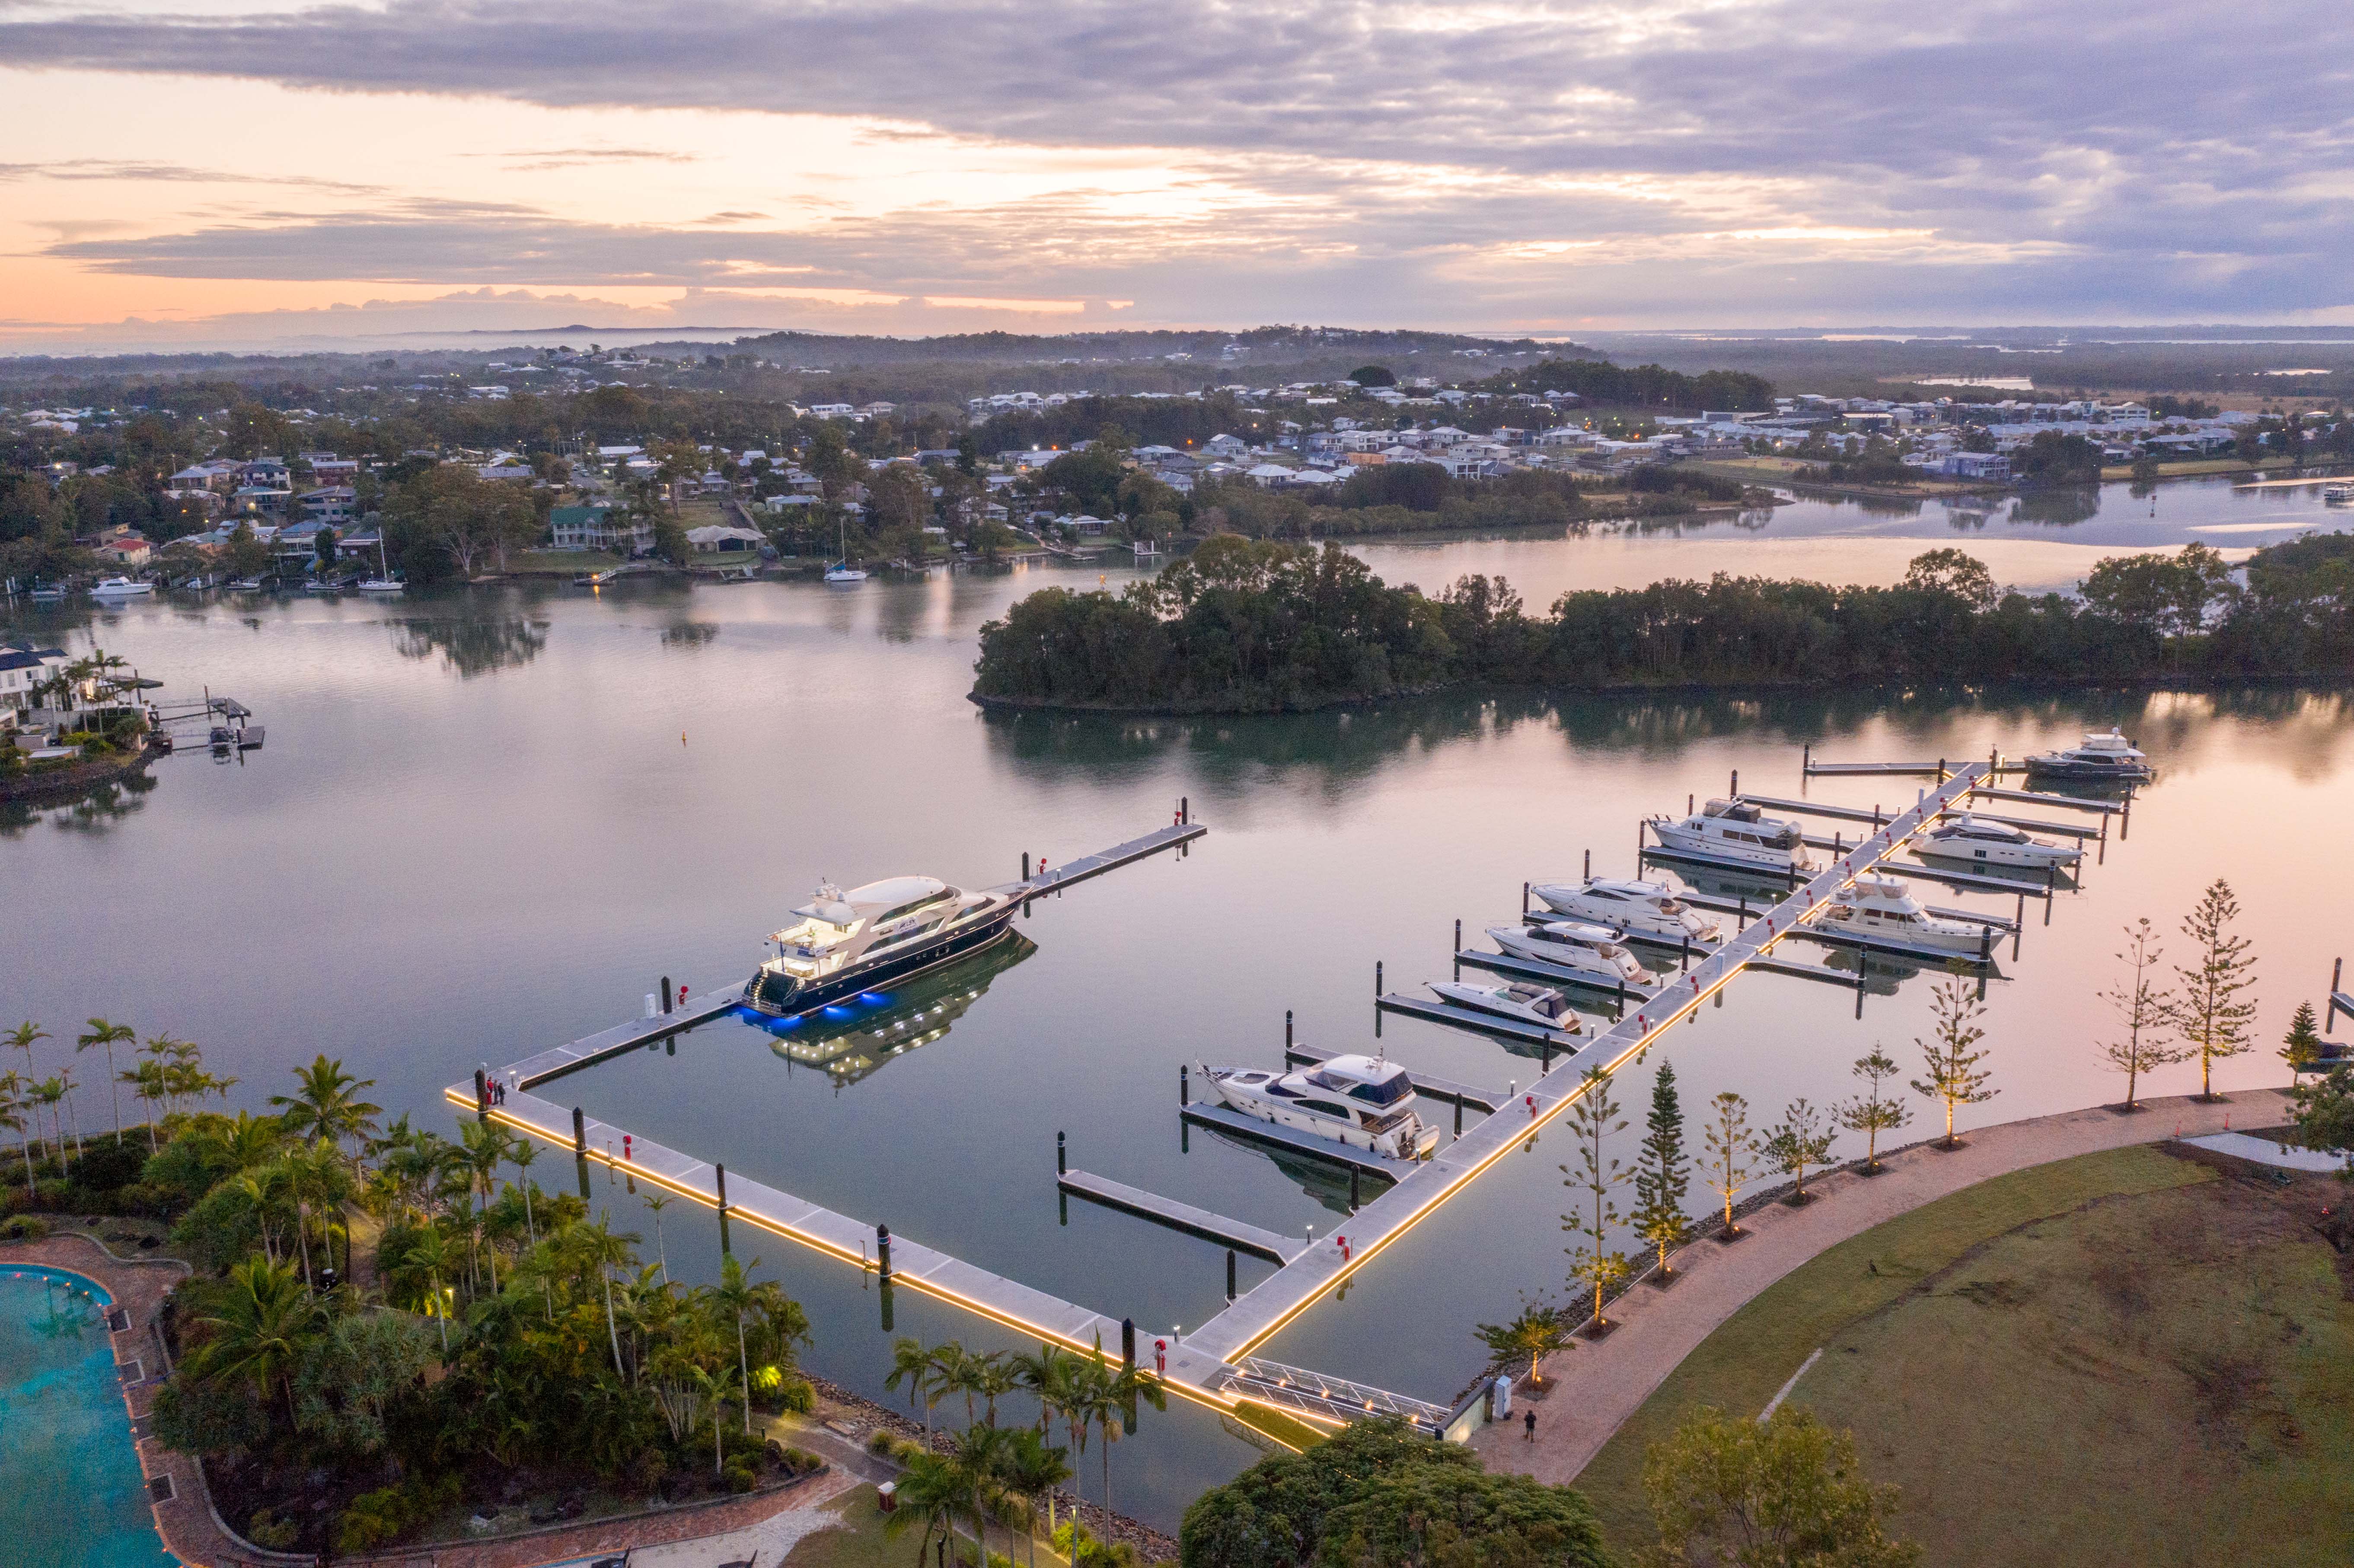 Things to do in Coomera Waters